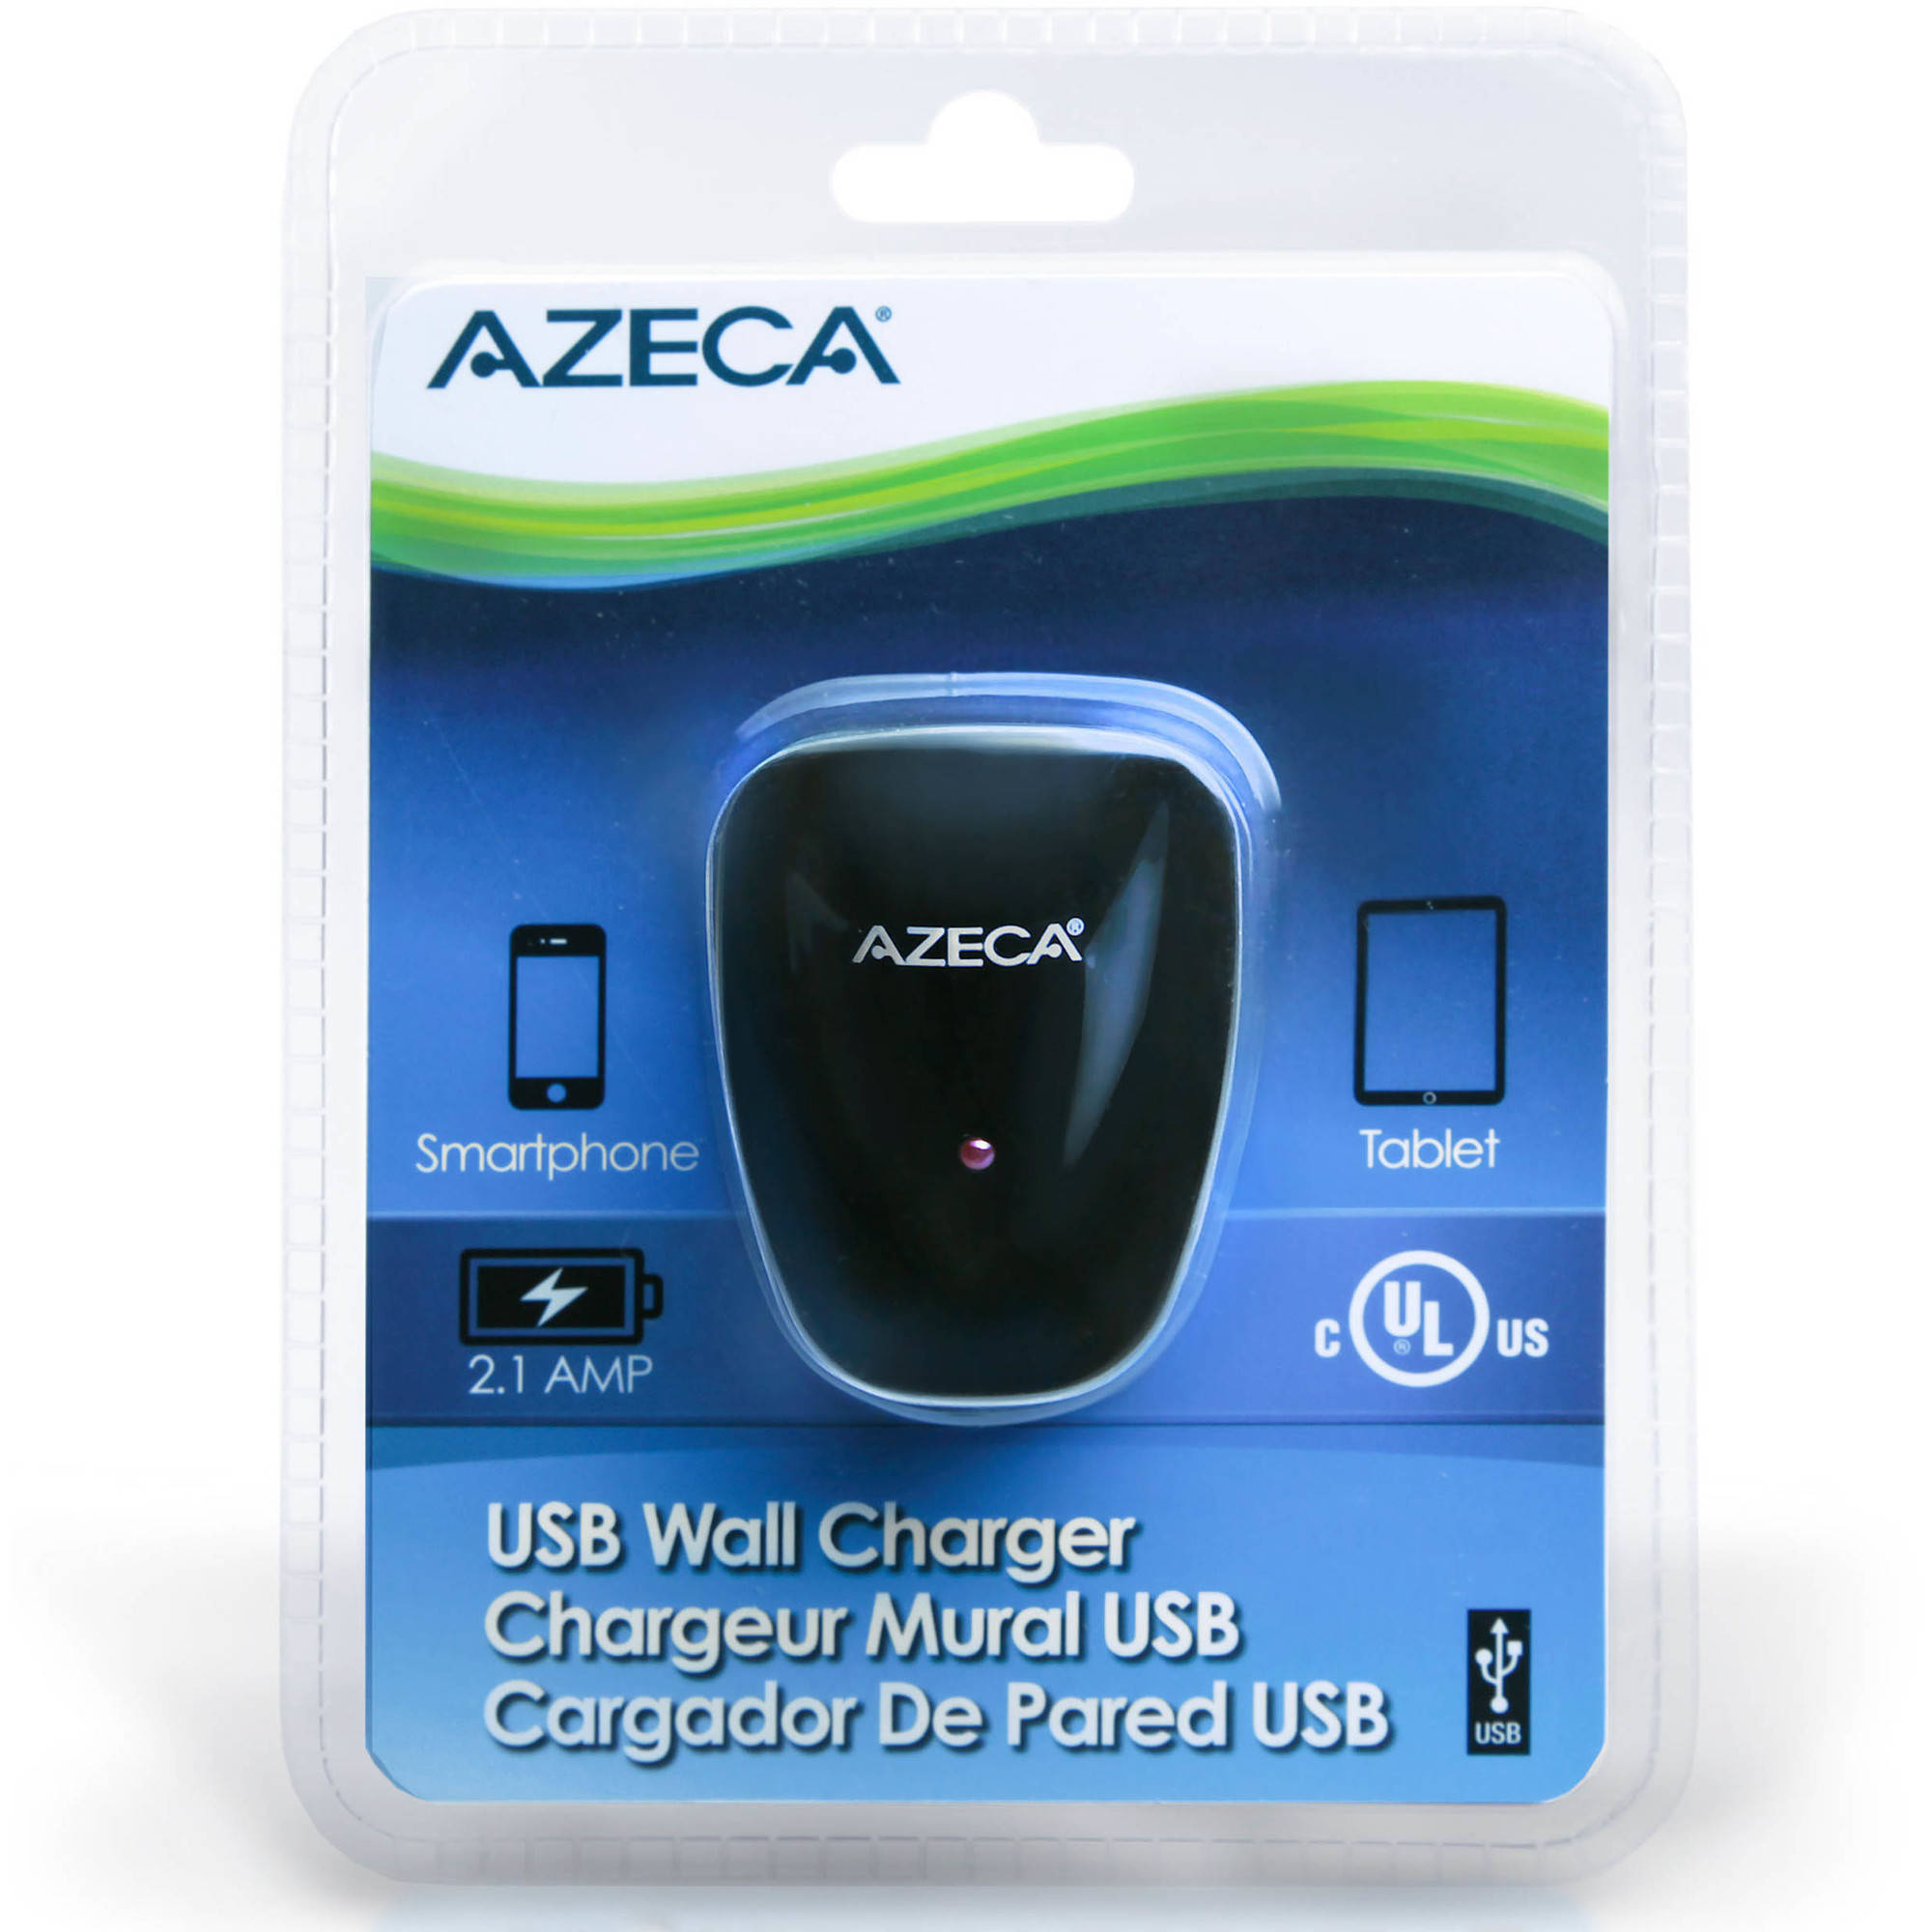 Azeca Travel Charger USB Power Adapter with Foldable Swivel Plug, 2.1 Amps, UL Approved - image 3 of 3